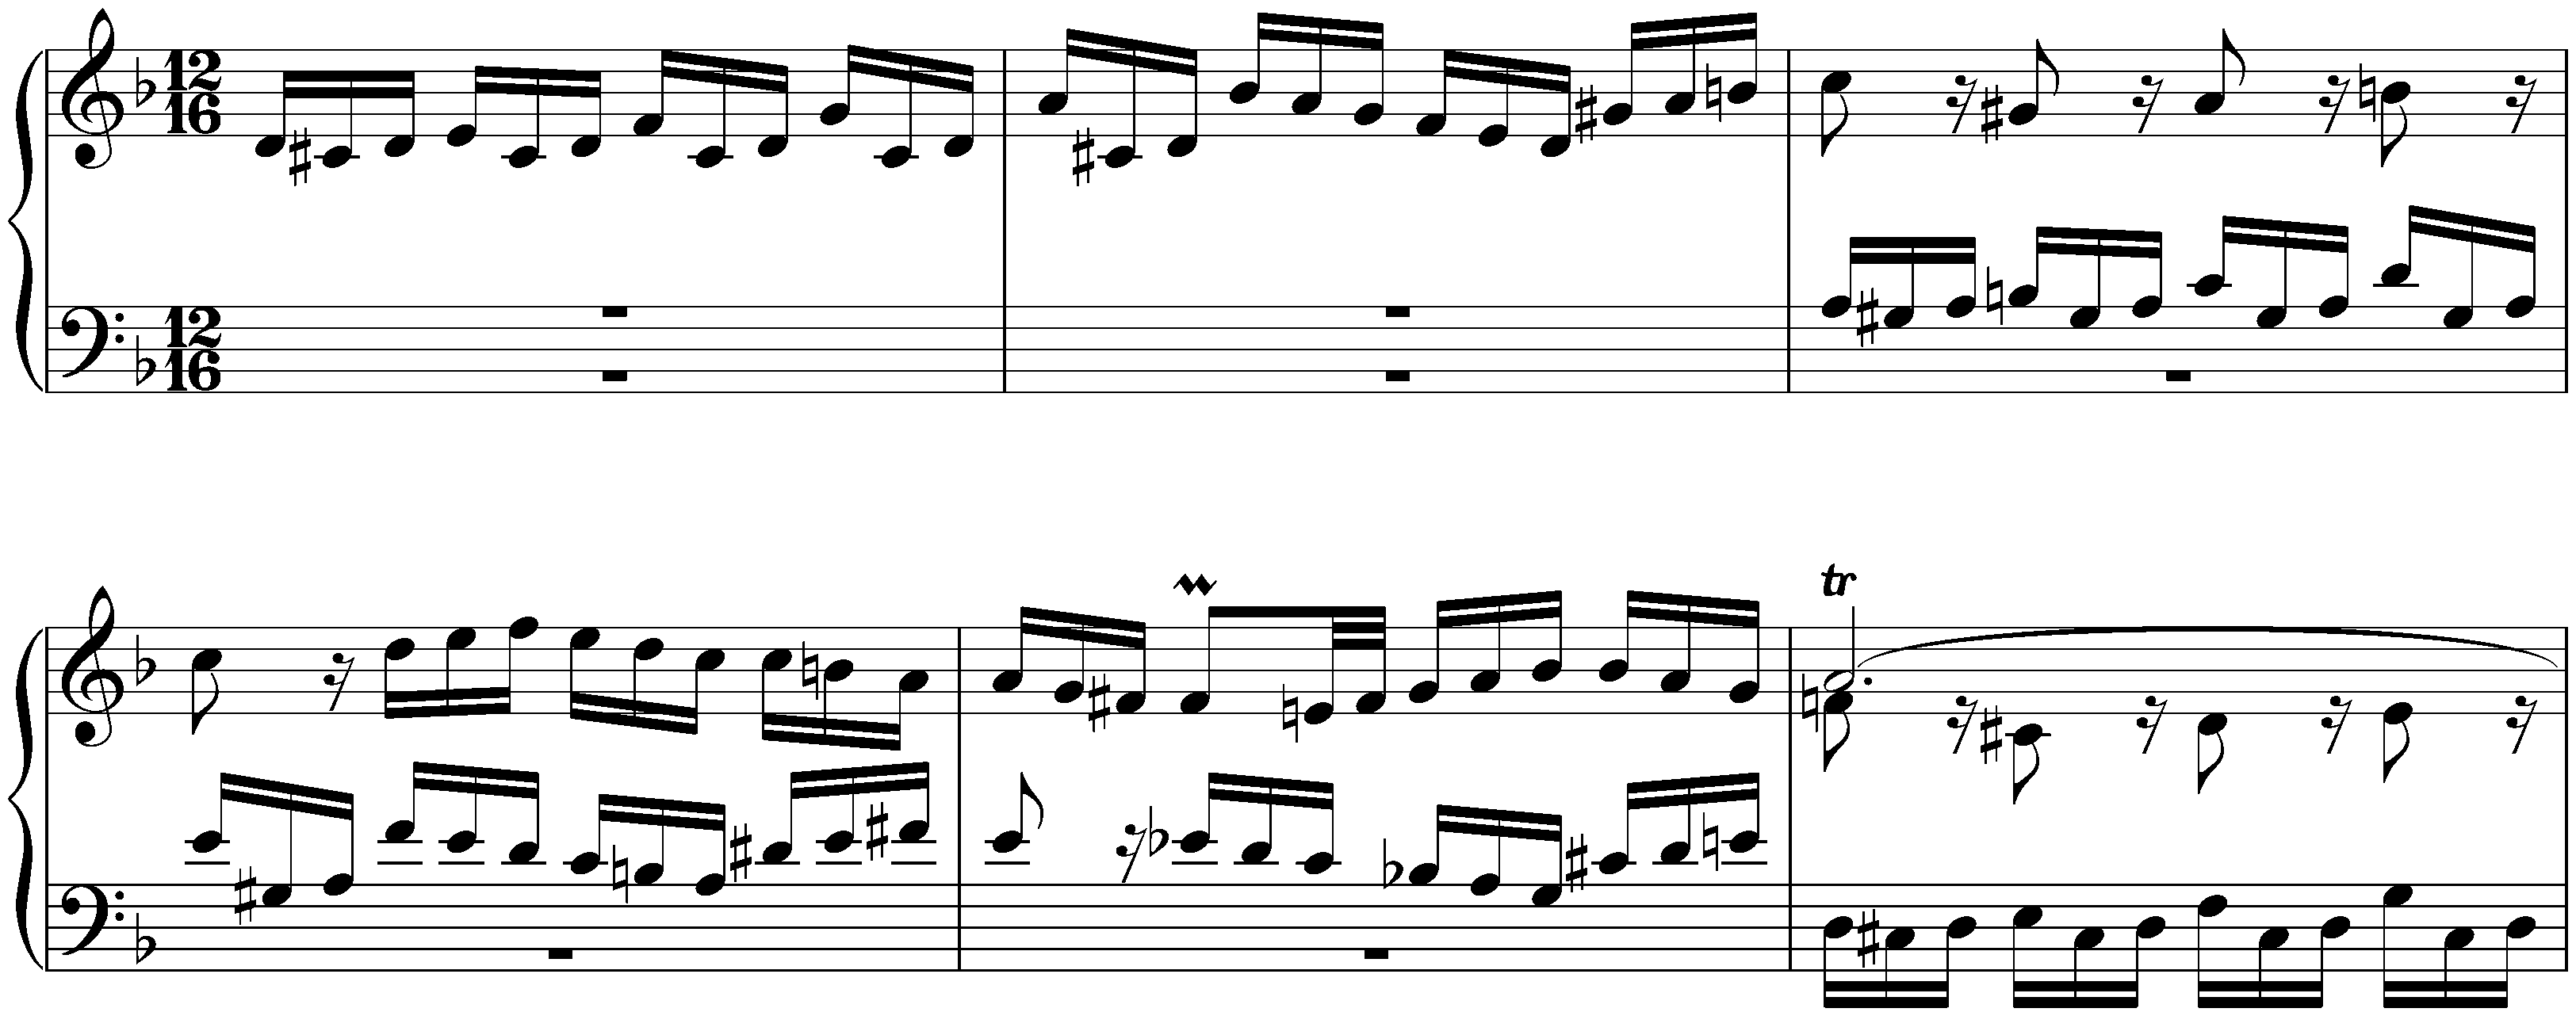 English Suite no. 6 in D minor, BWV 811; 6. Gigue